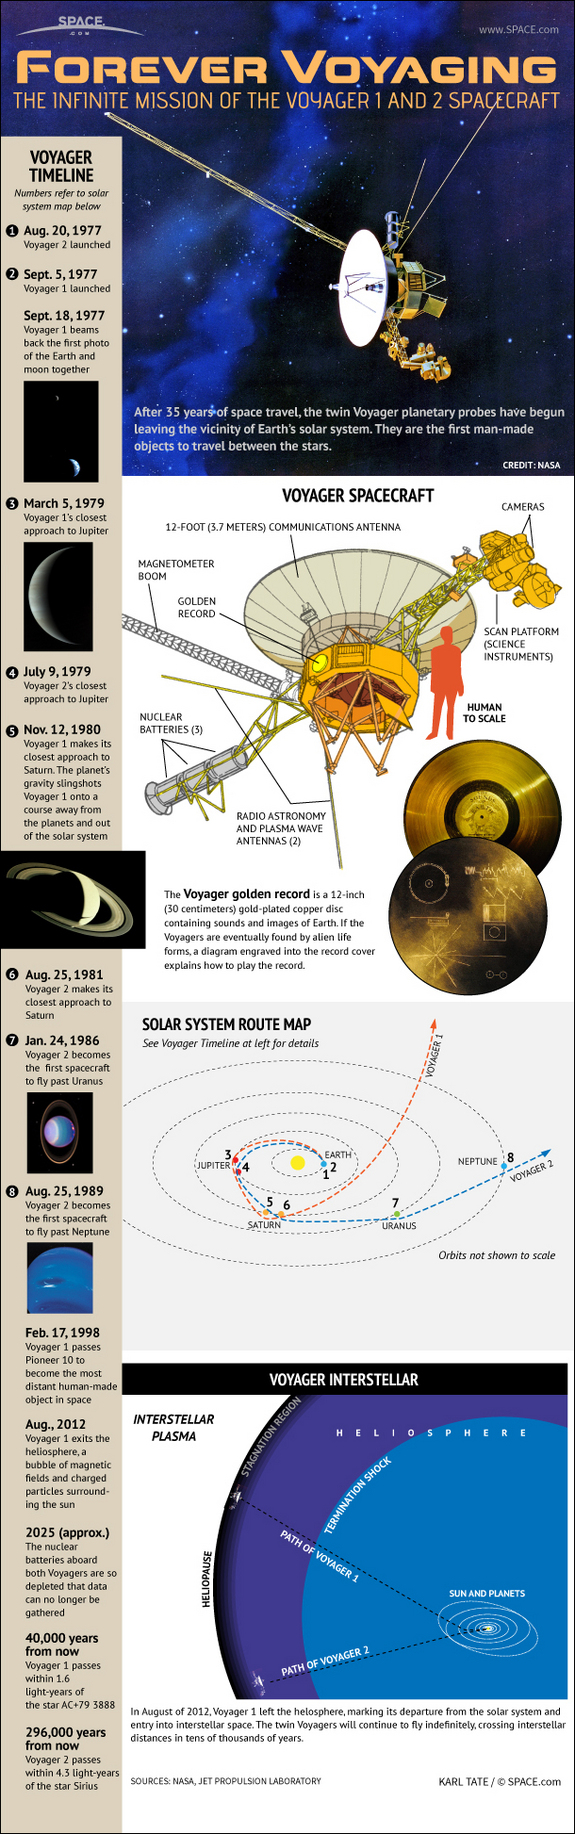 Find out how NASA's historic Voyager interplanetary probes worked in this SPACE.com infographic.